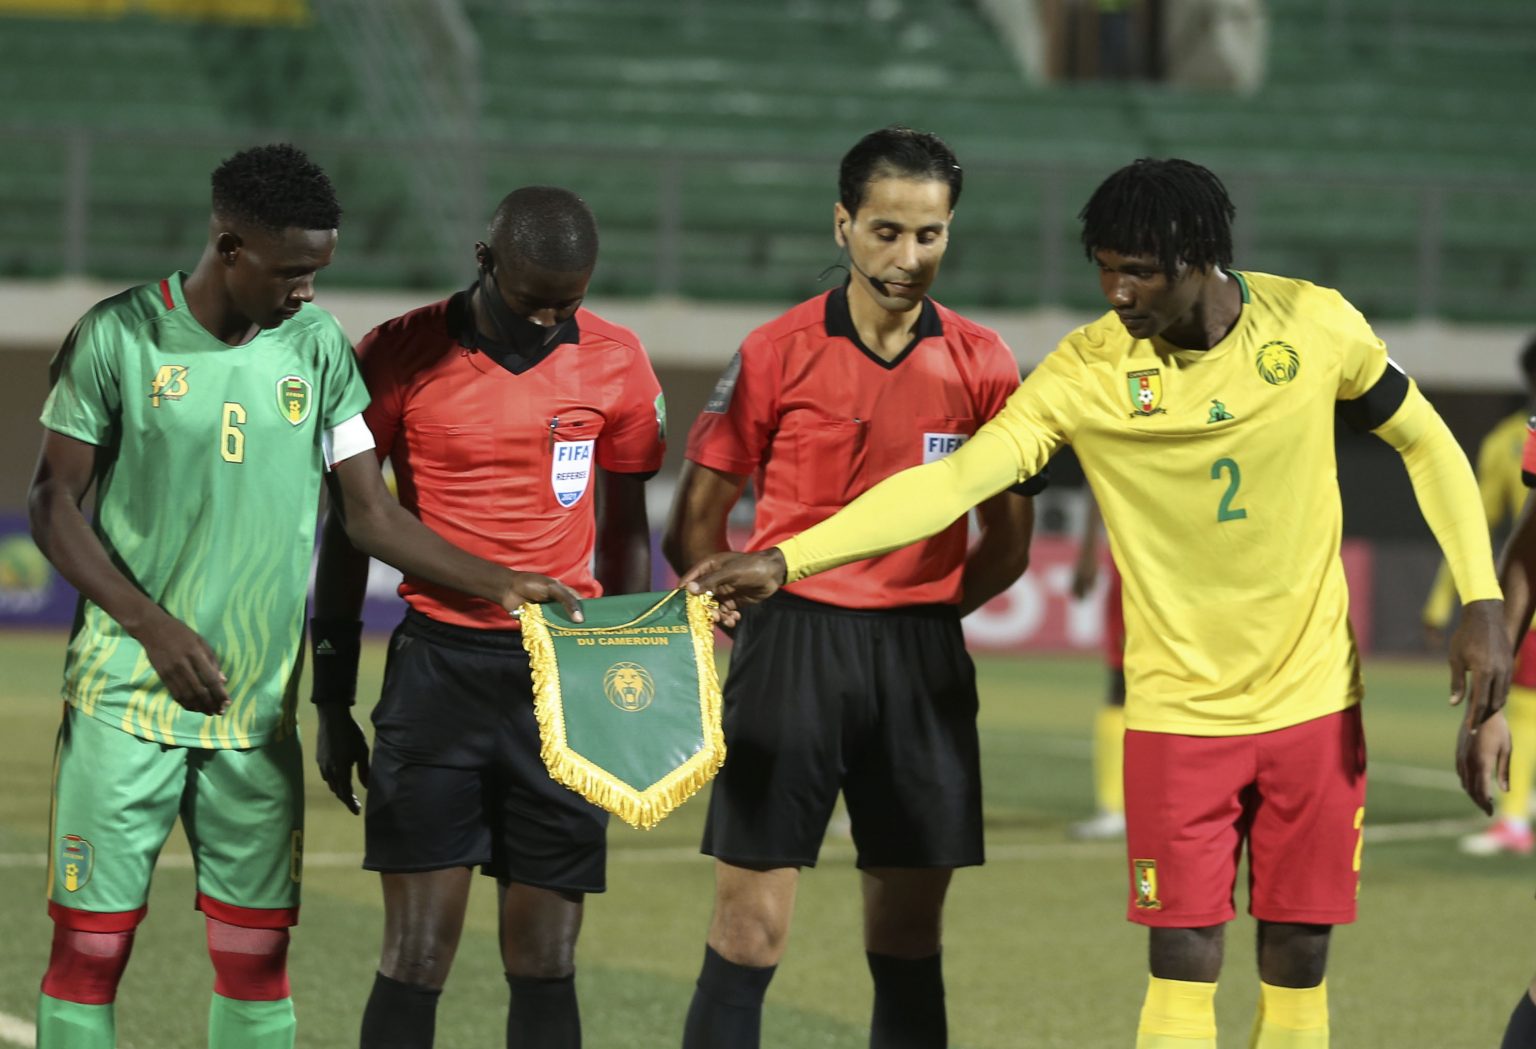 AFCON U20 lineups for Mozambique Mauritania Africa Top Sports